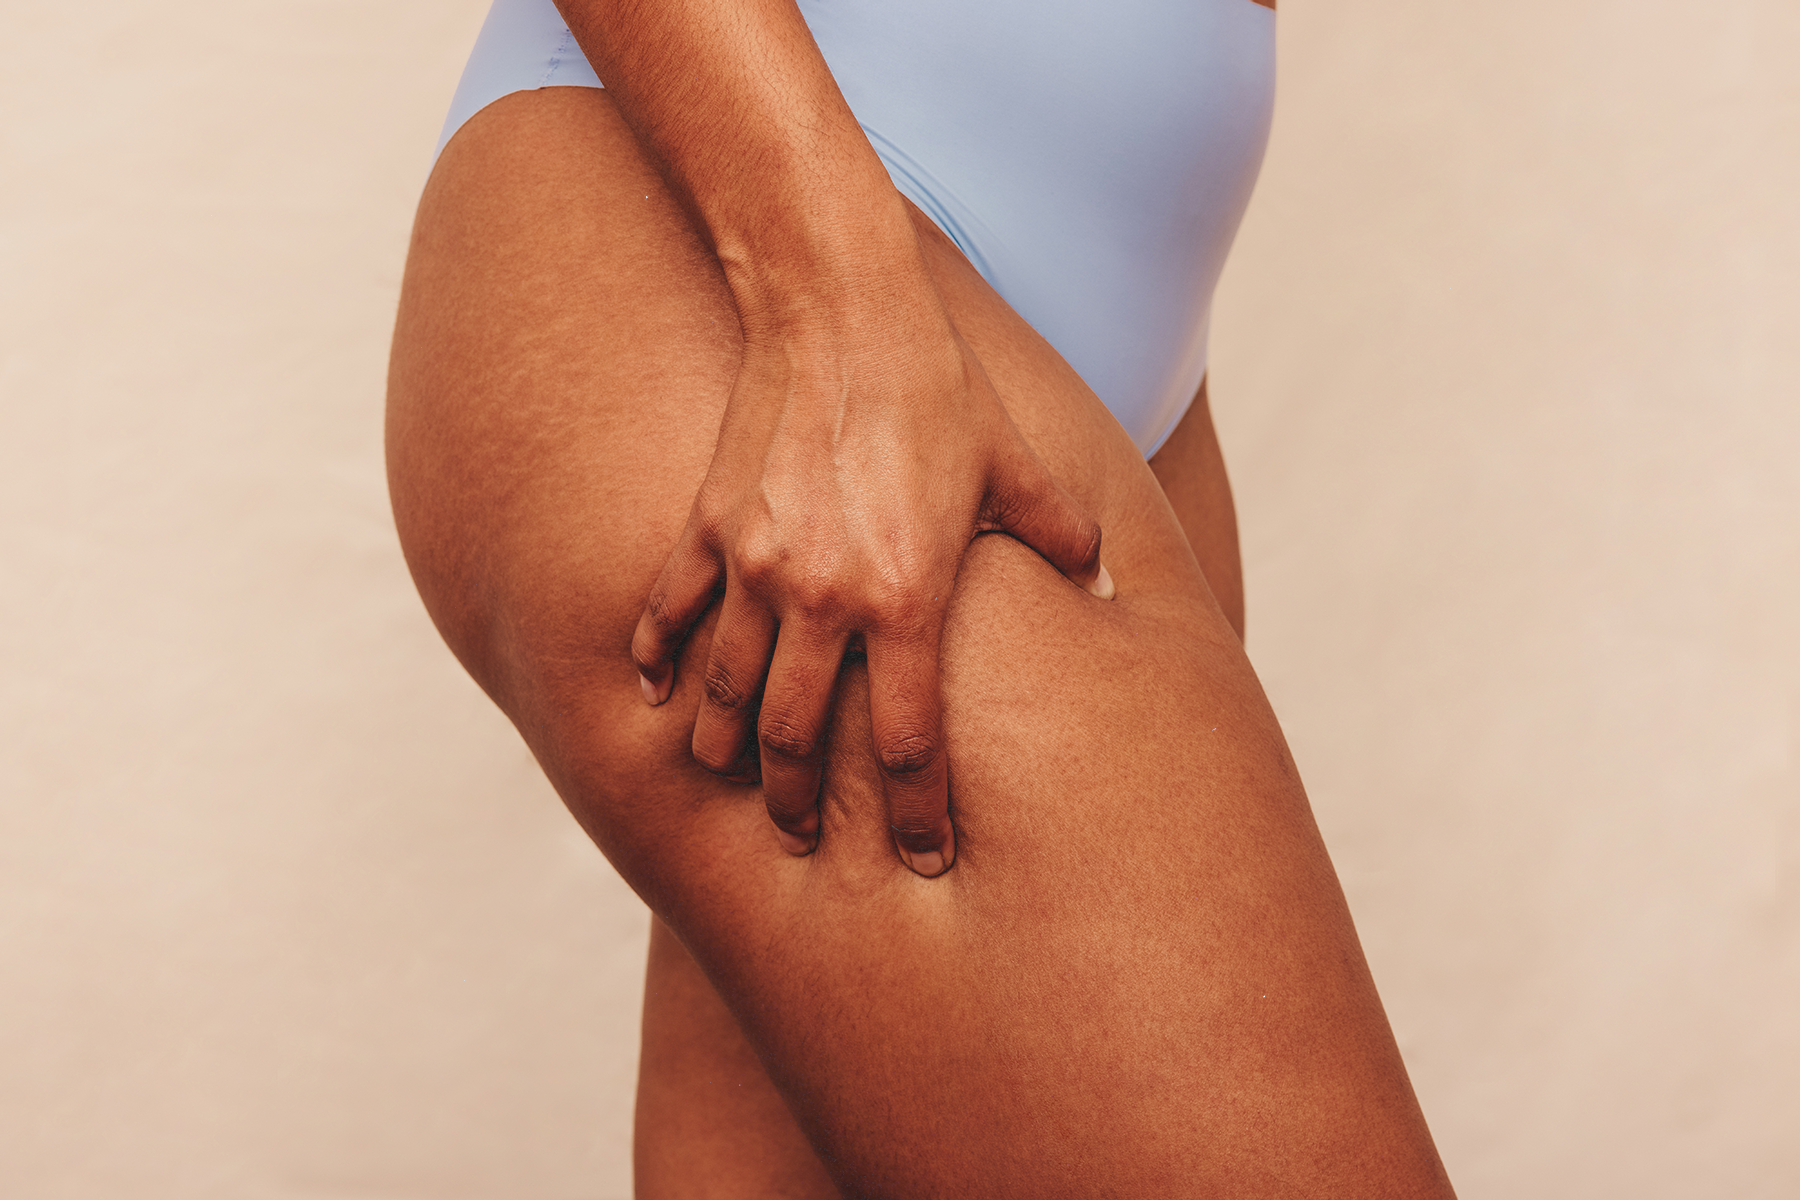 How To Get Rid of Cellulite in 2022 13 Tips from Dermatologists